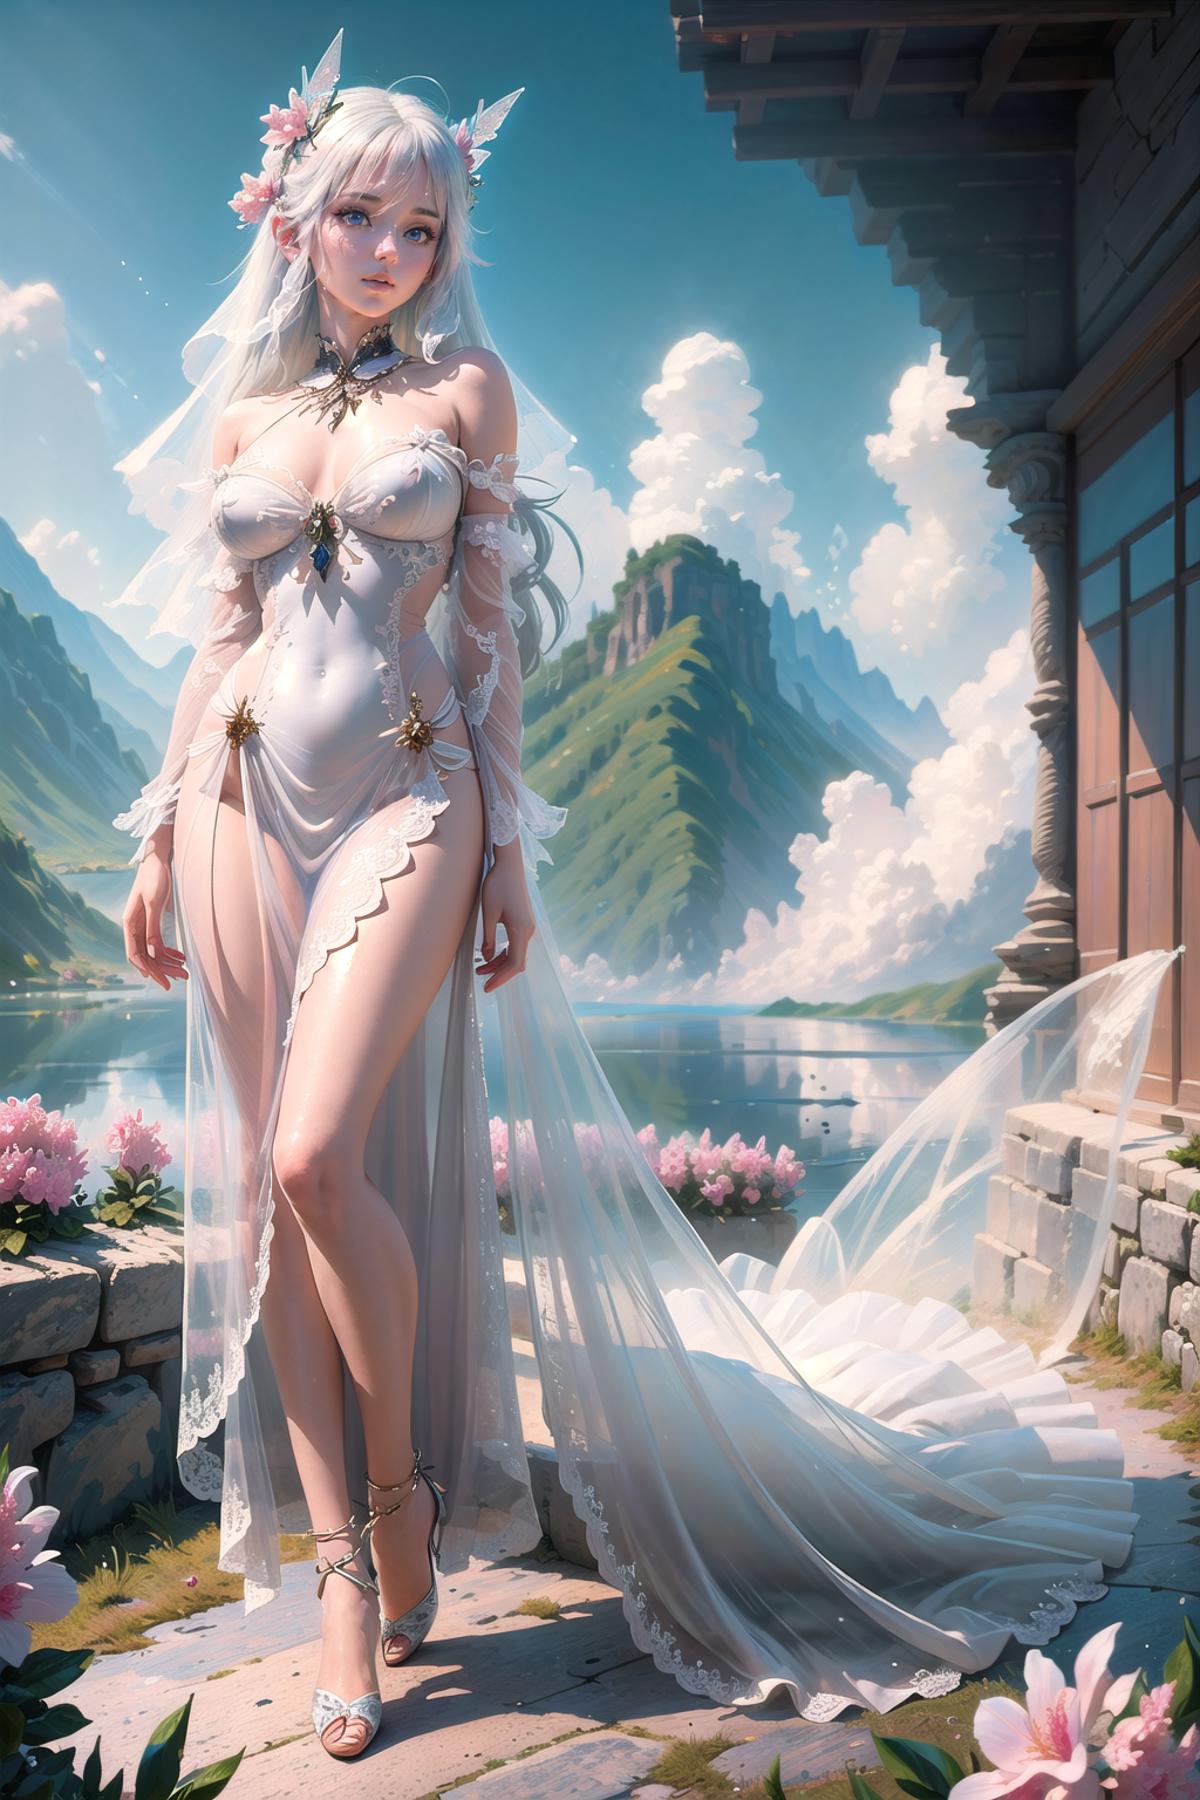 An Artistic Illustration of A Bride in a White Wedding Dress Standing in Front of a Body of Water